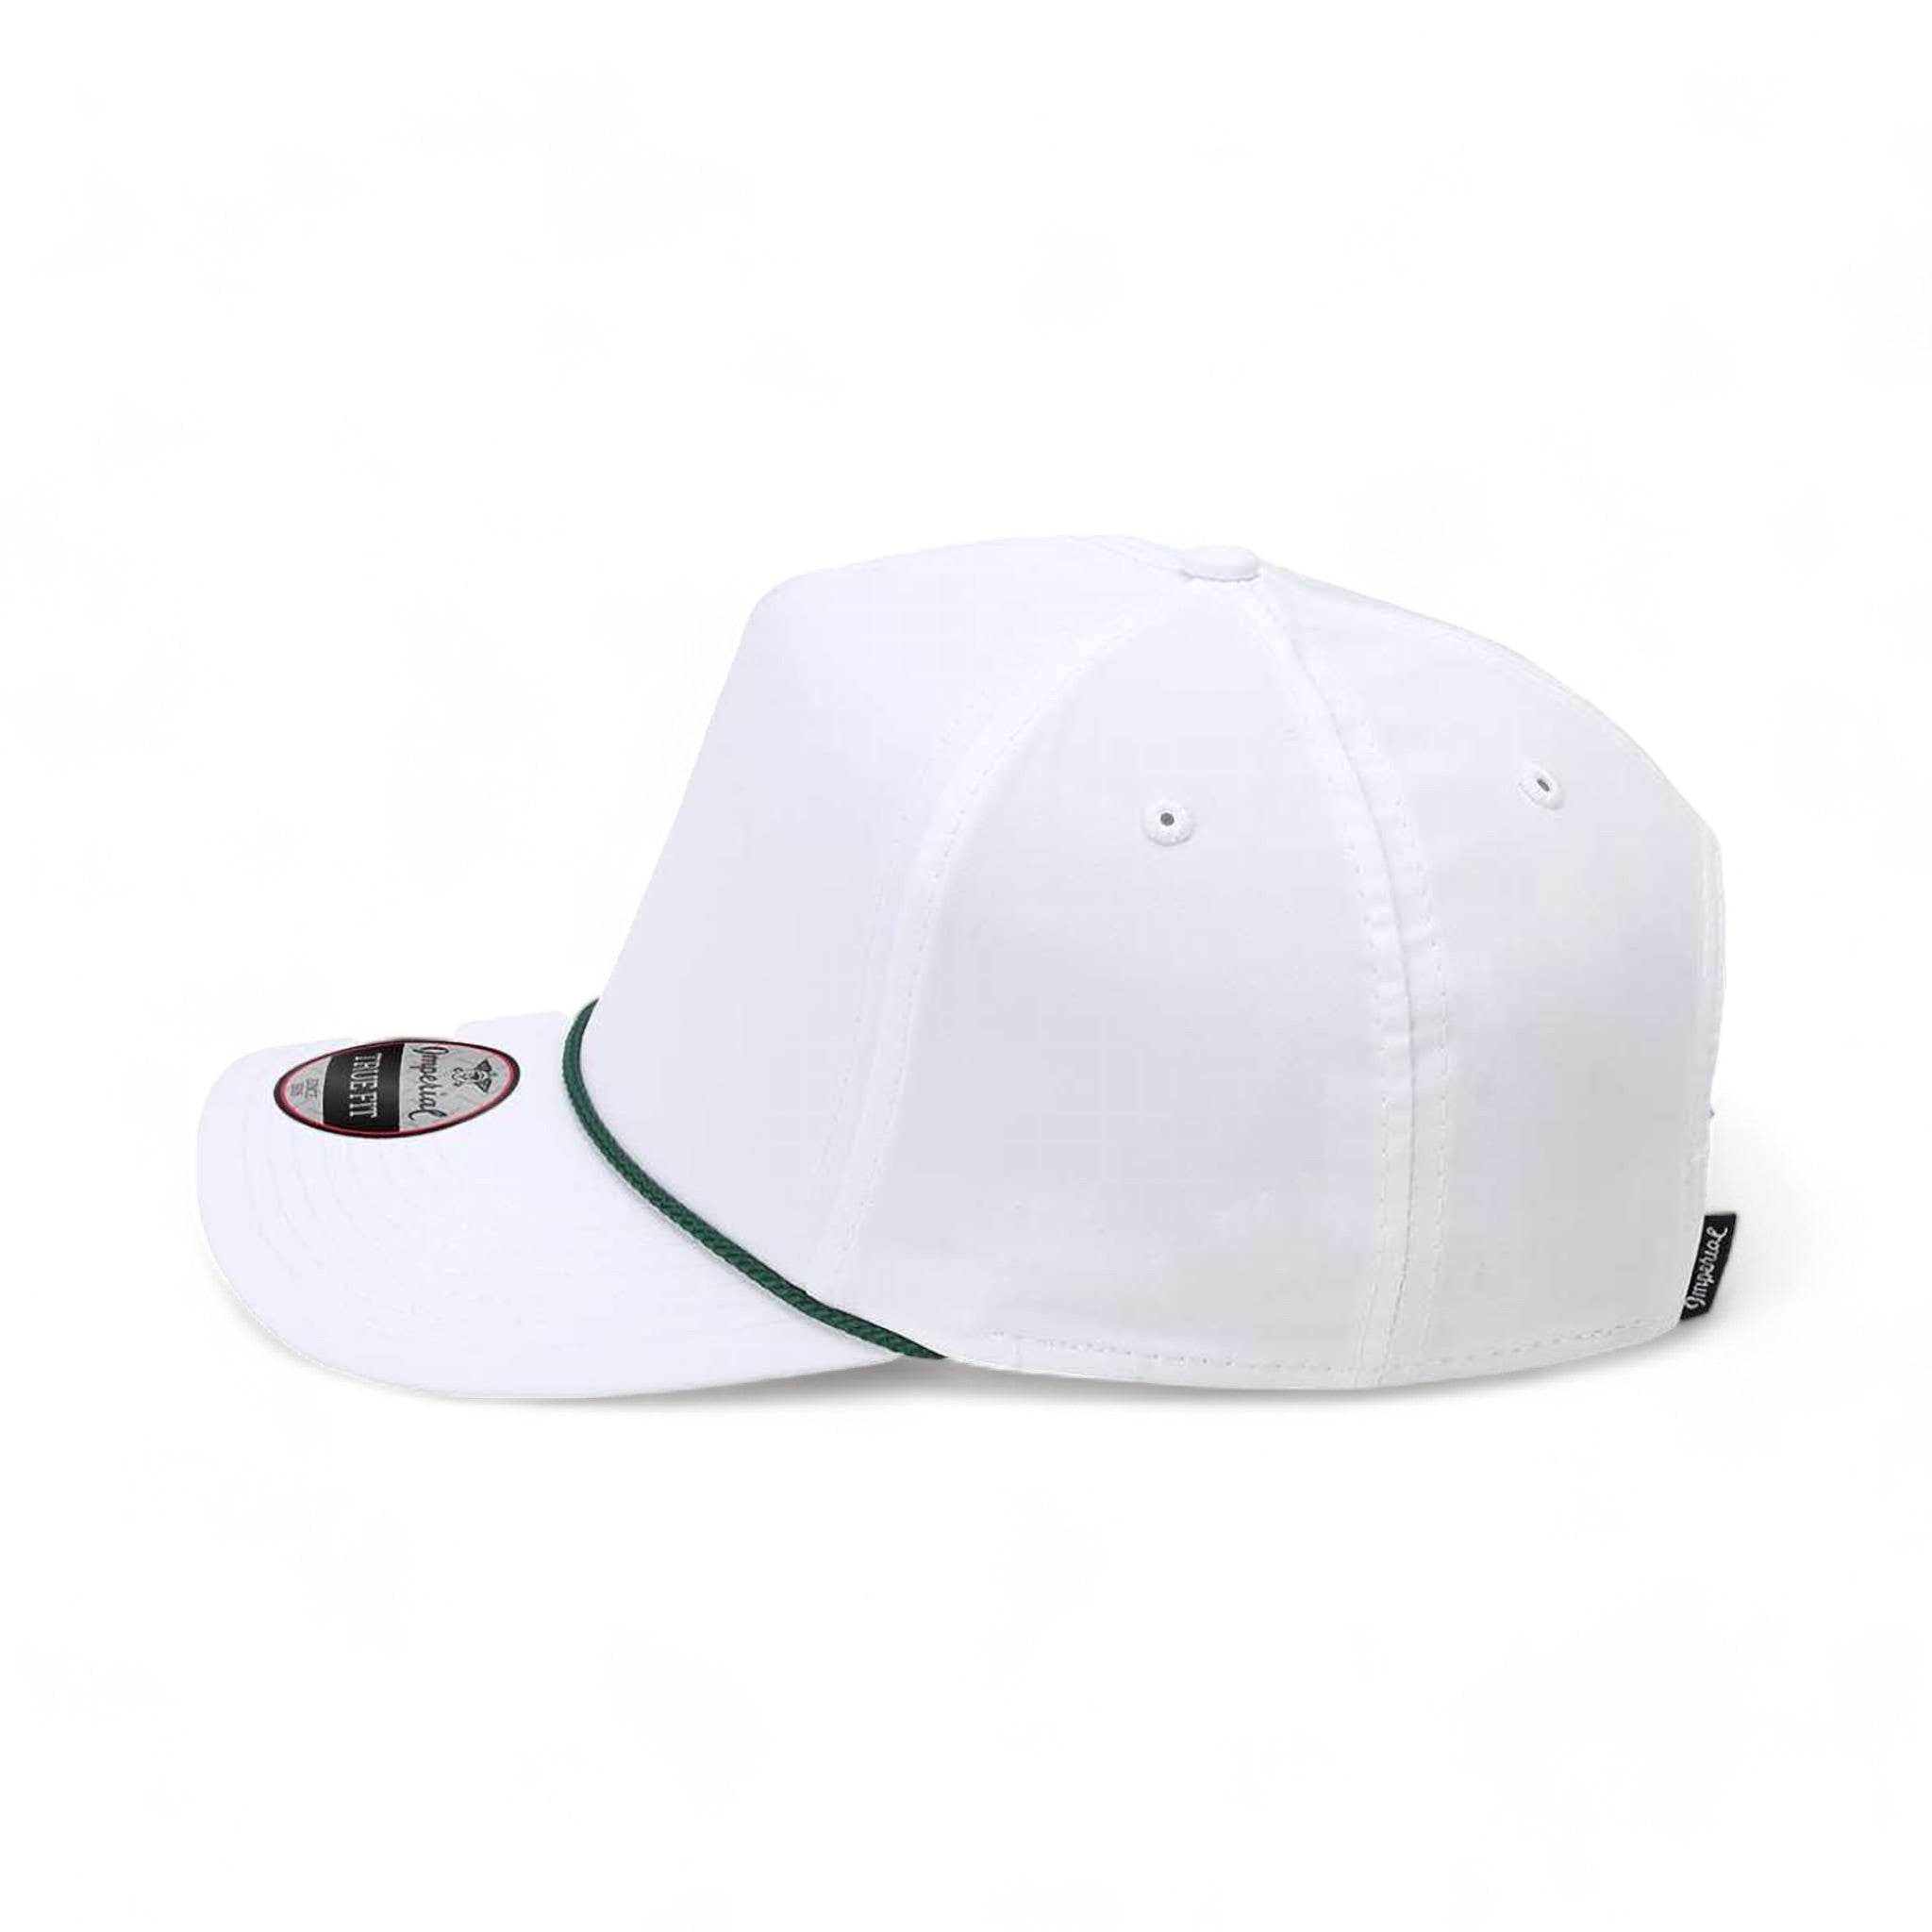 Side view of Imperial 5054 custom hat in white and dark green